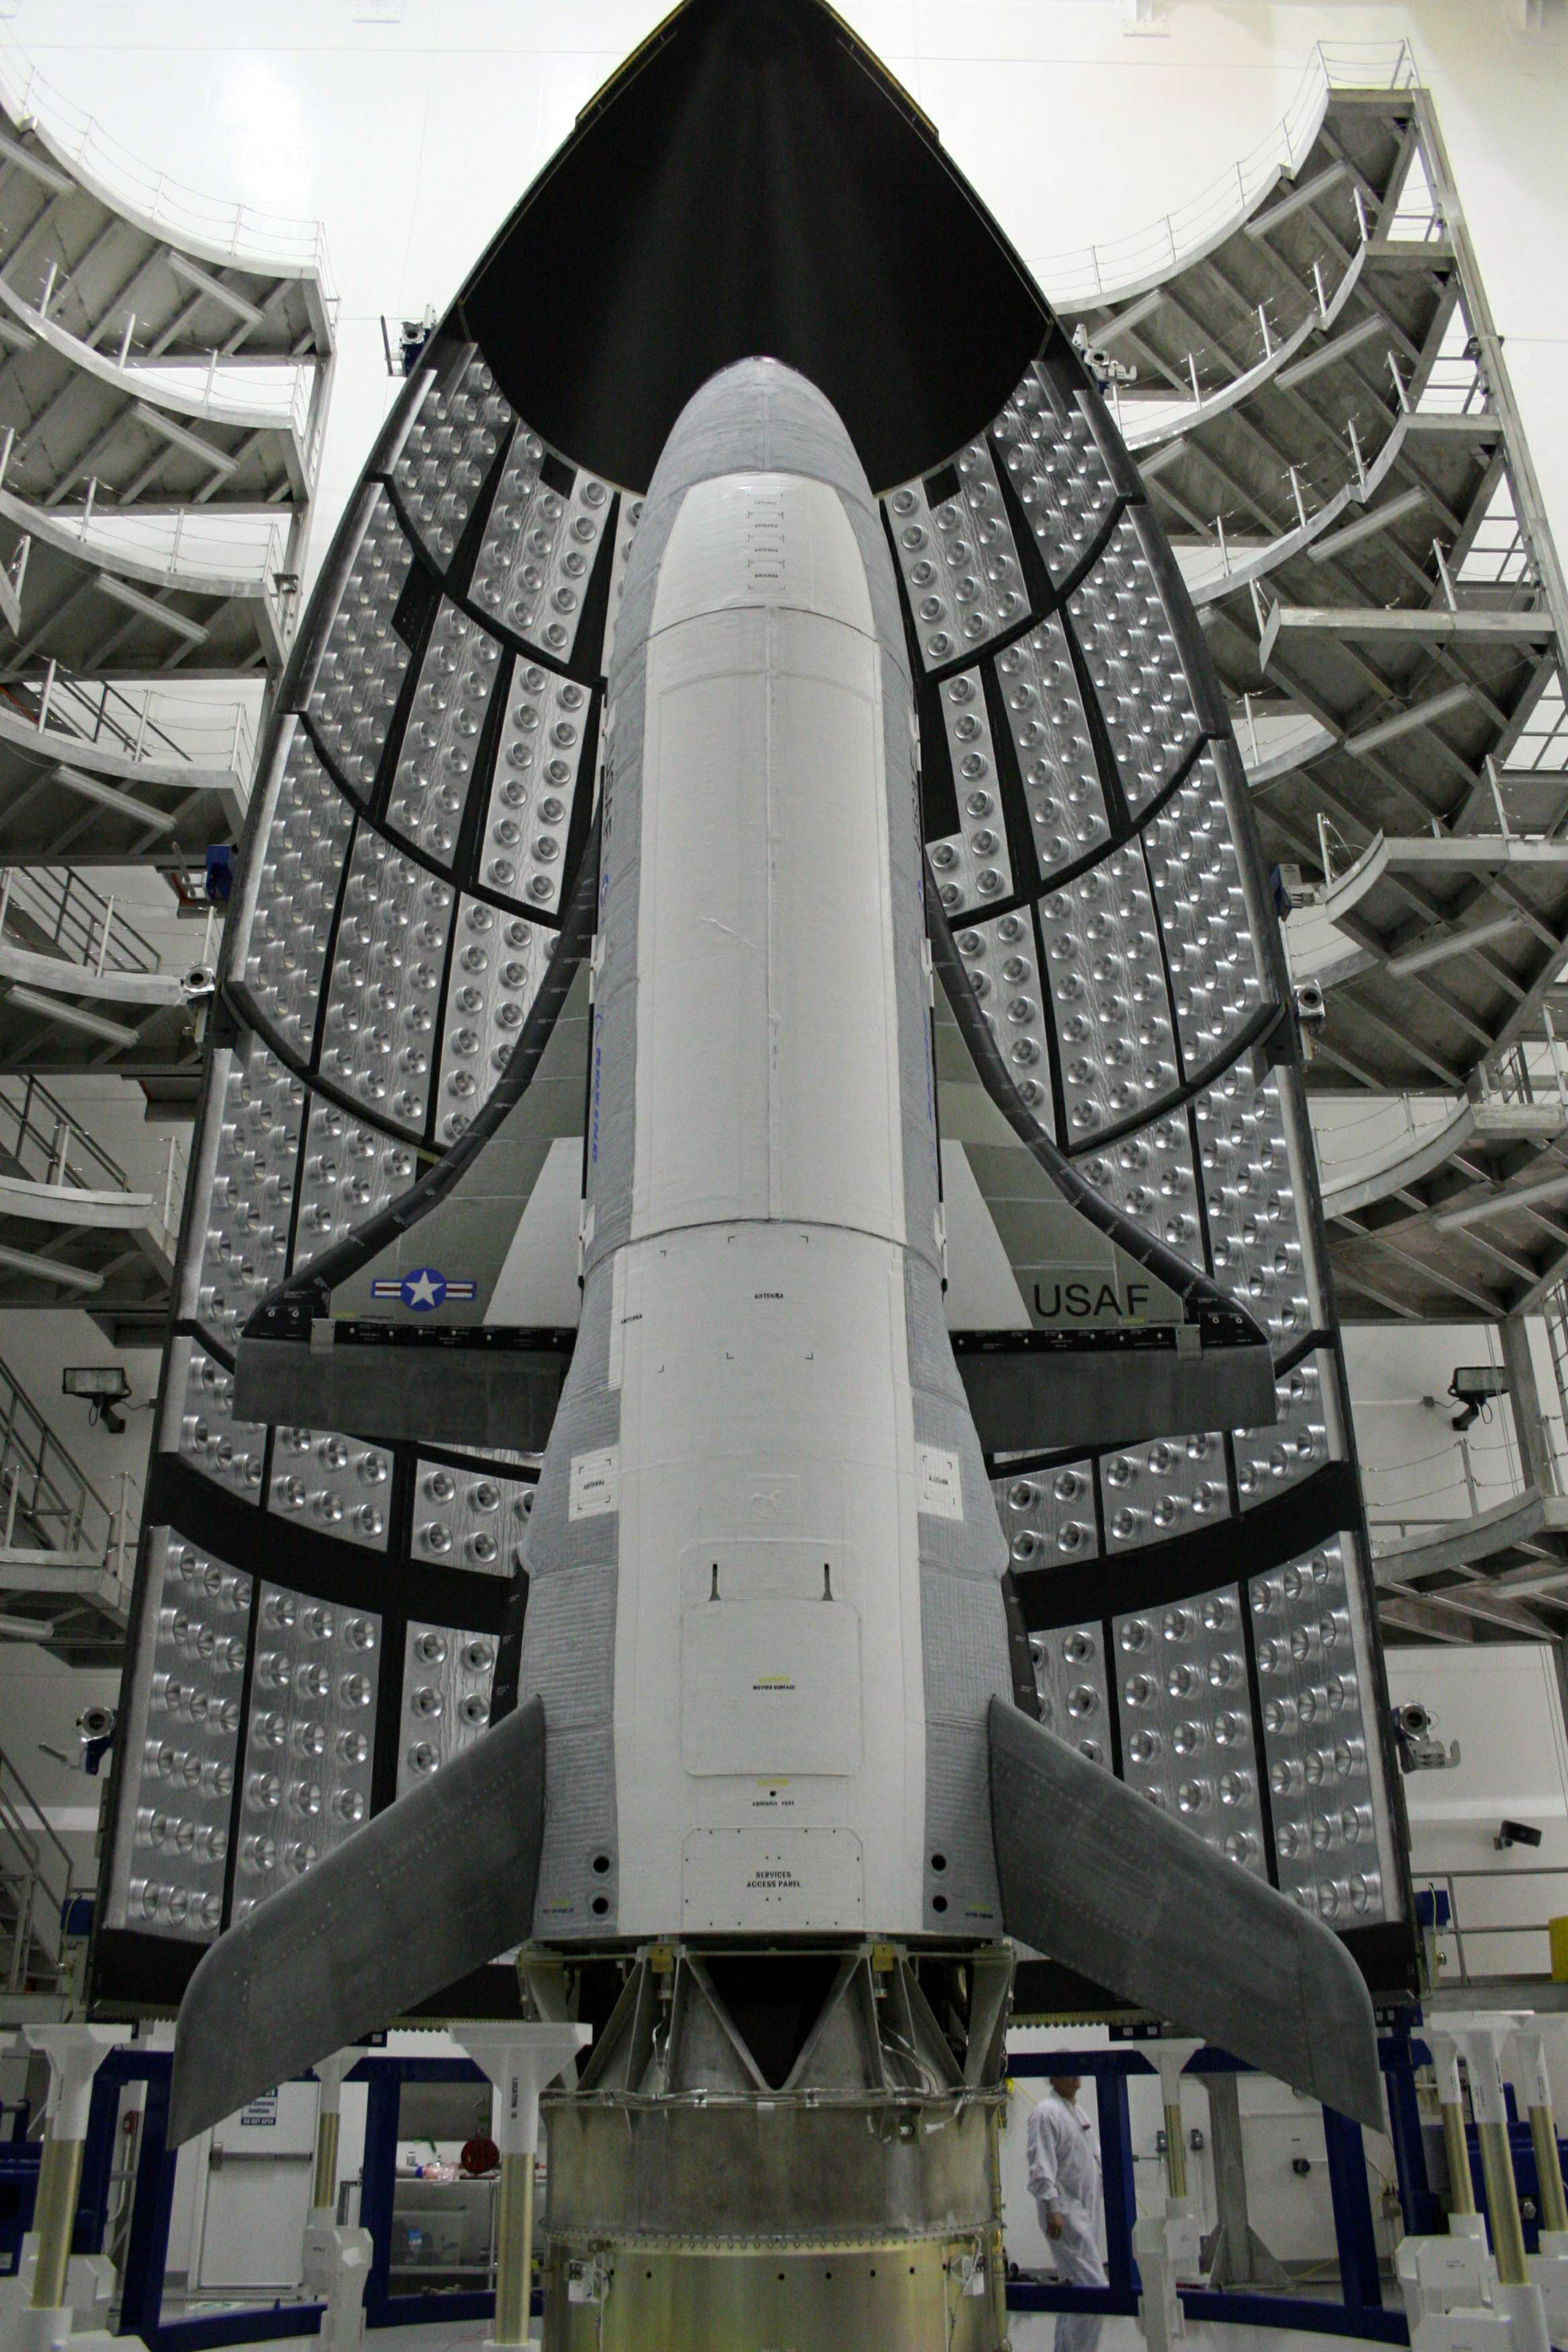 boeing_x-37b_inside_payload_fairing_before_launch.jpeg